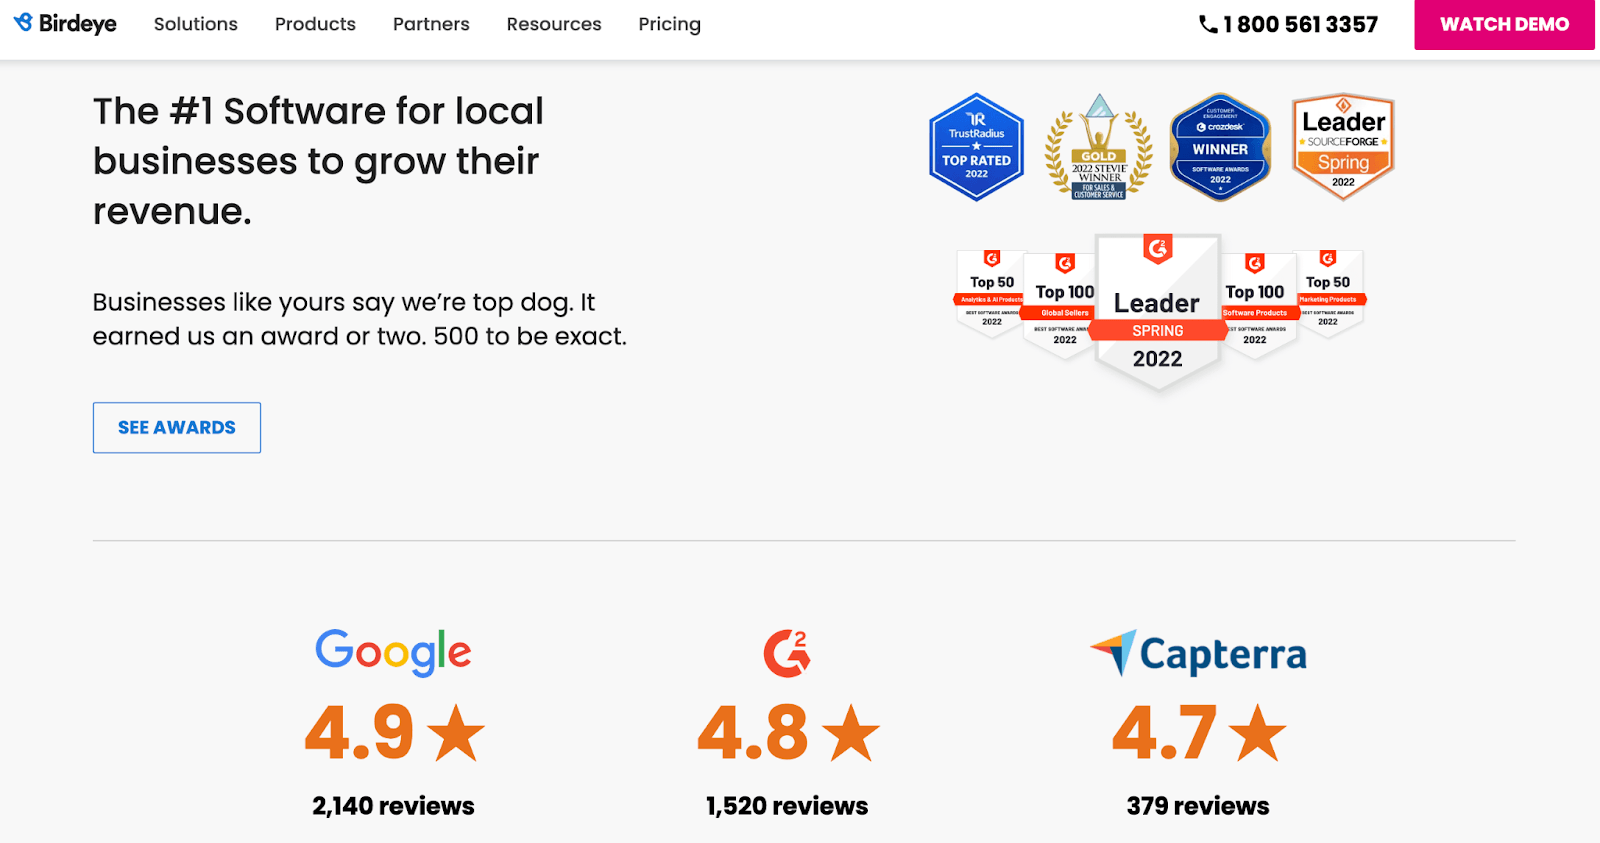 A list of the awards BirdEye has won and their average customer review on various popular platforms (Google, etc). Heading reads, 'The #1 Software for local businesses to grow their revenue.'